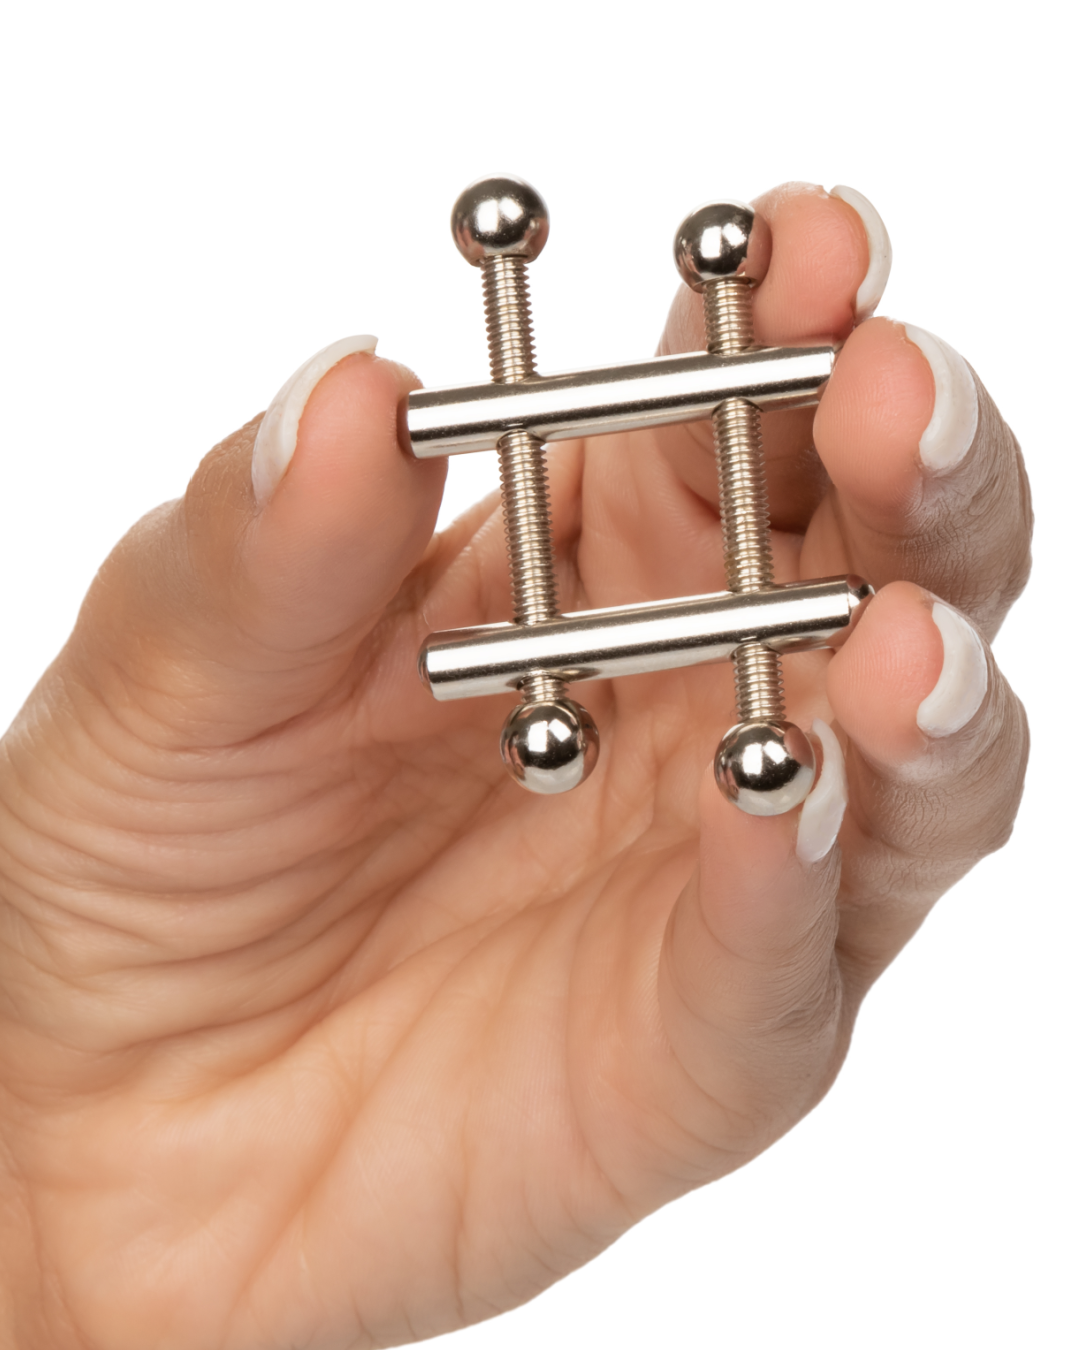 Nipple Grips Crossbar Nipple Vices held in a woman's hand